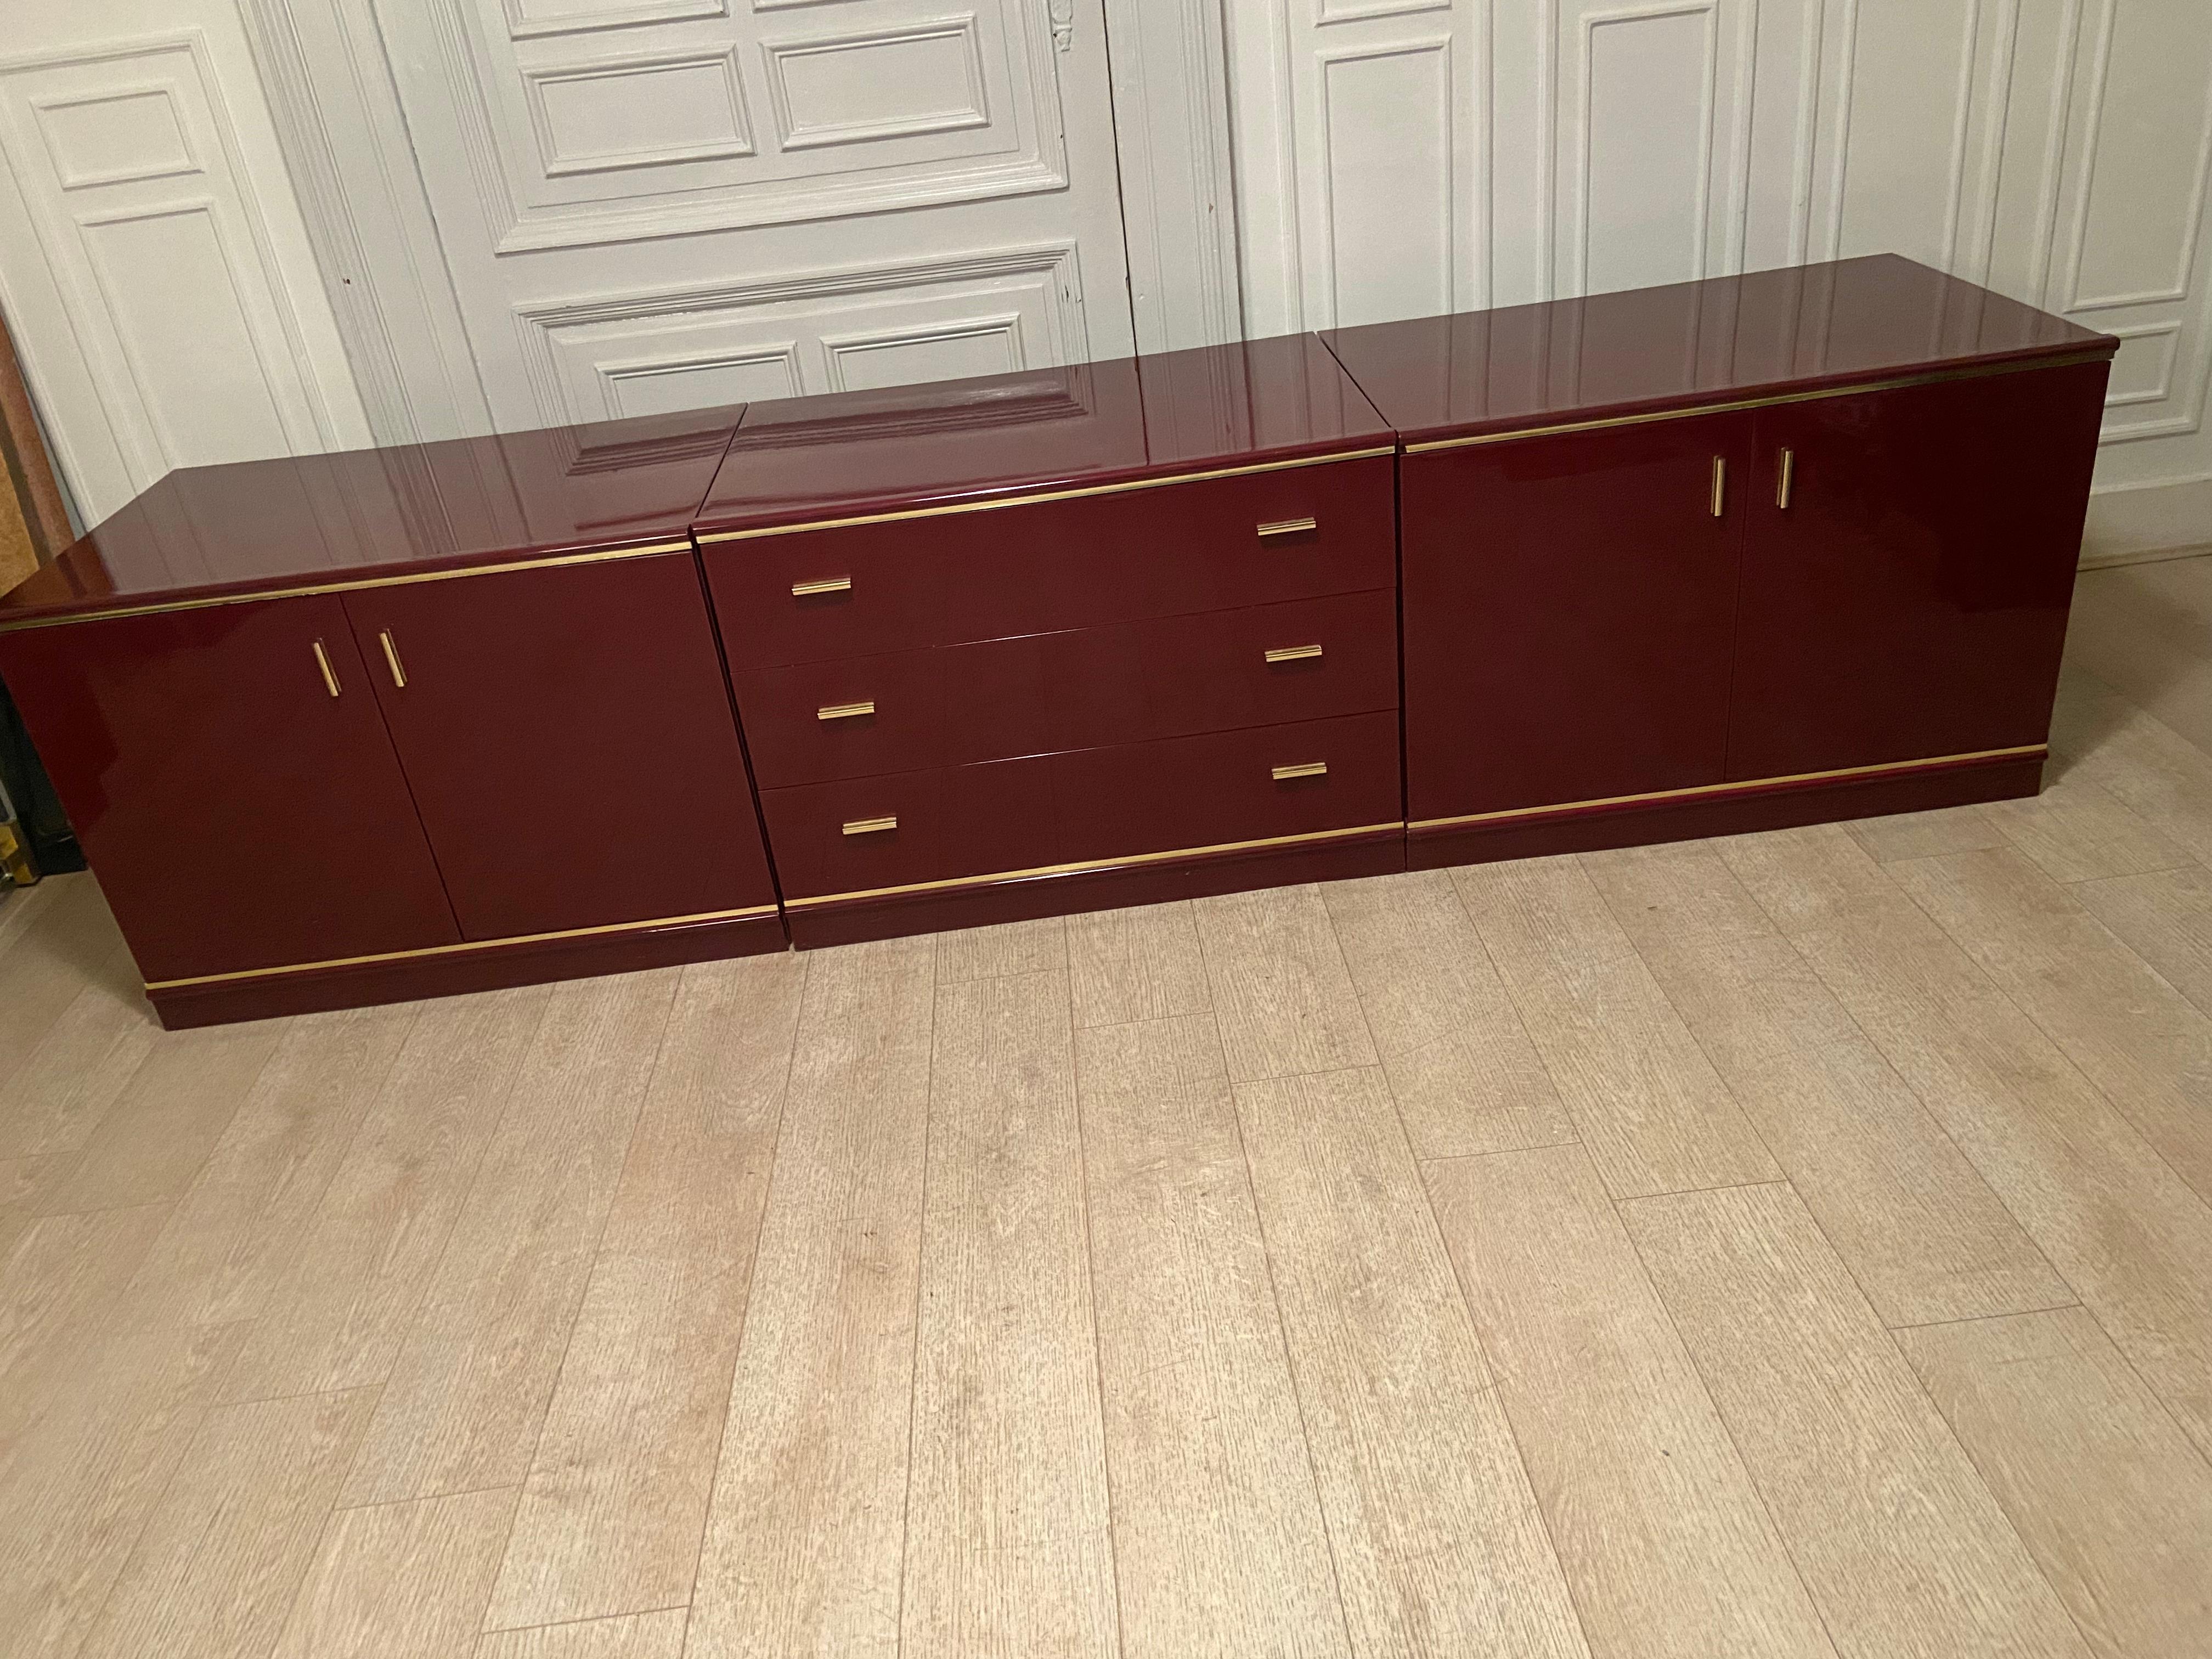 Burgundy lacquered and brass sideboard, 1970s.